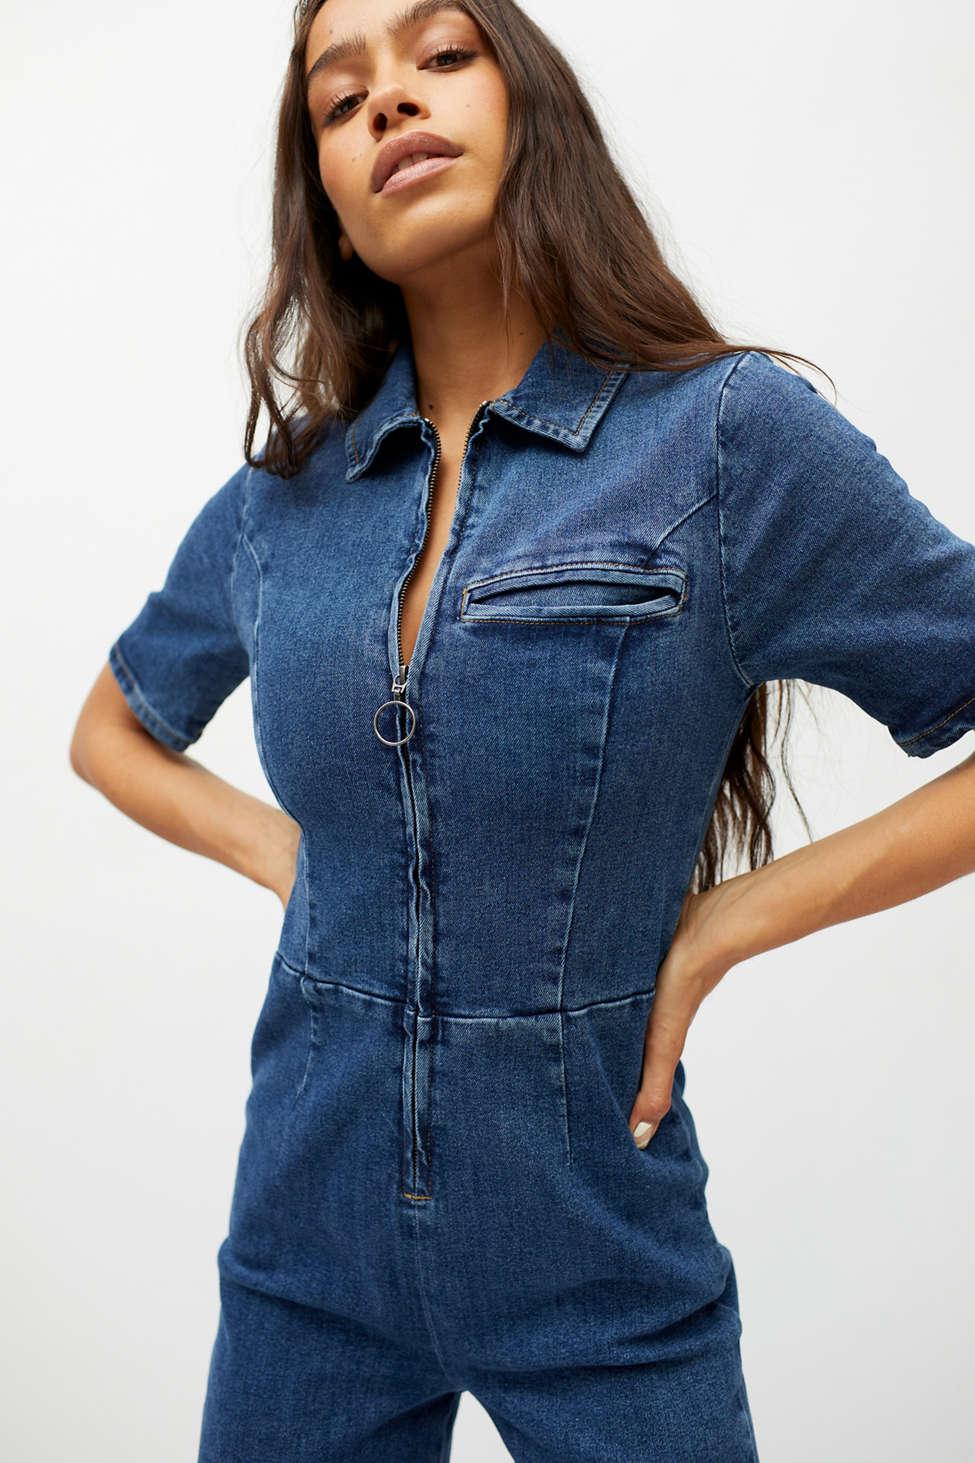 Urban Outfitters Uo Hello Sunshine Denim Jumpsuit in Blue | Lyst